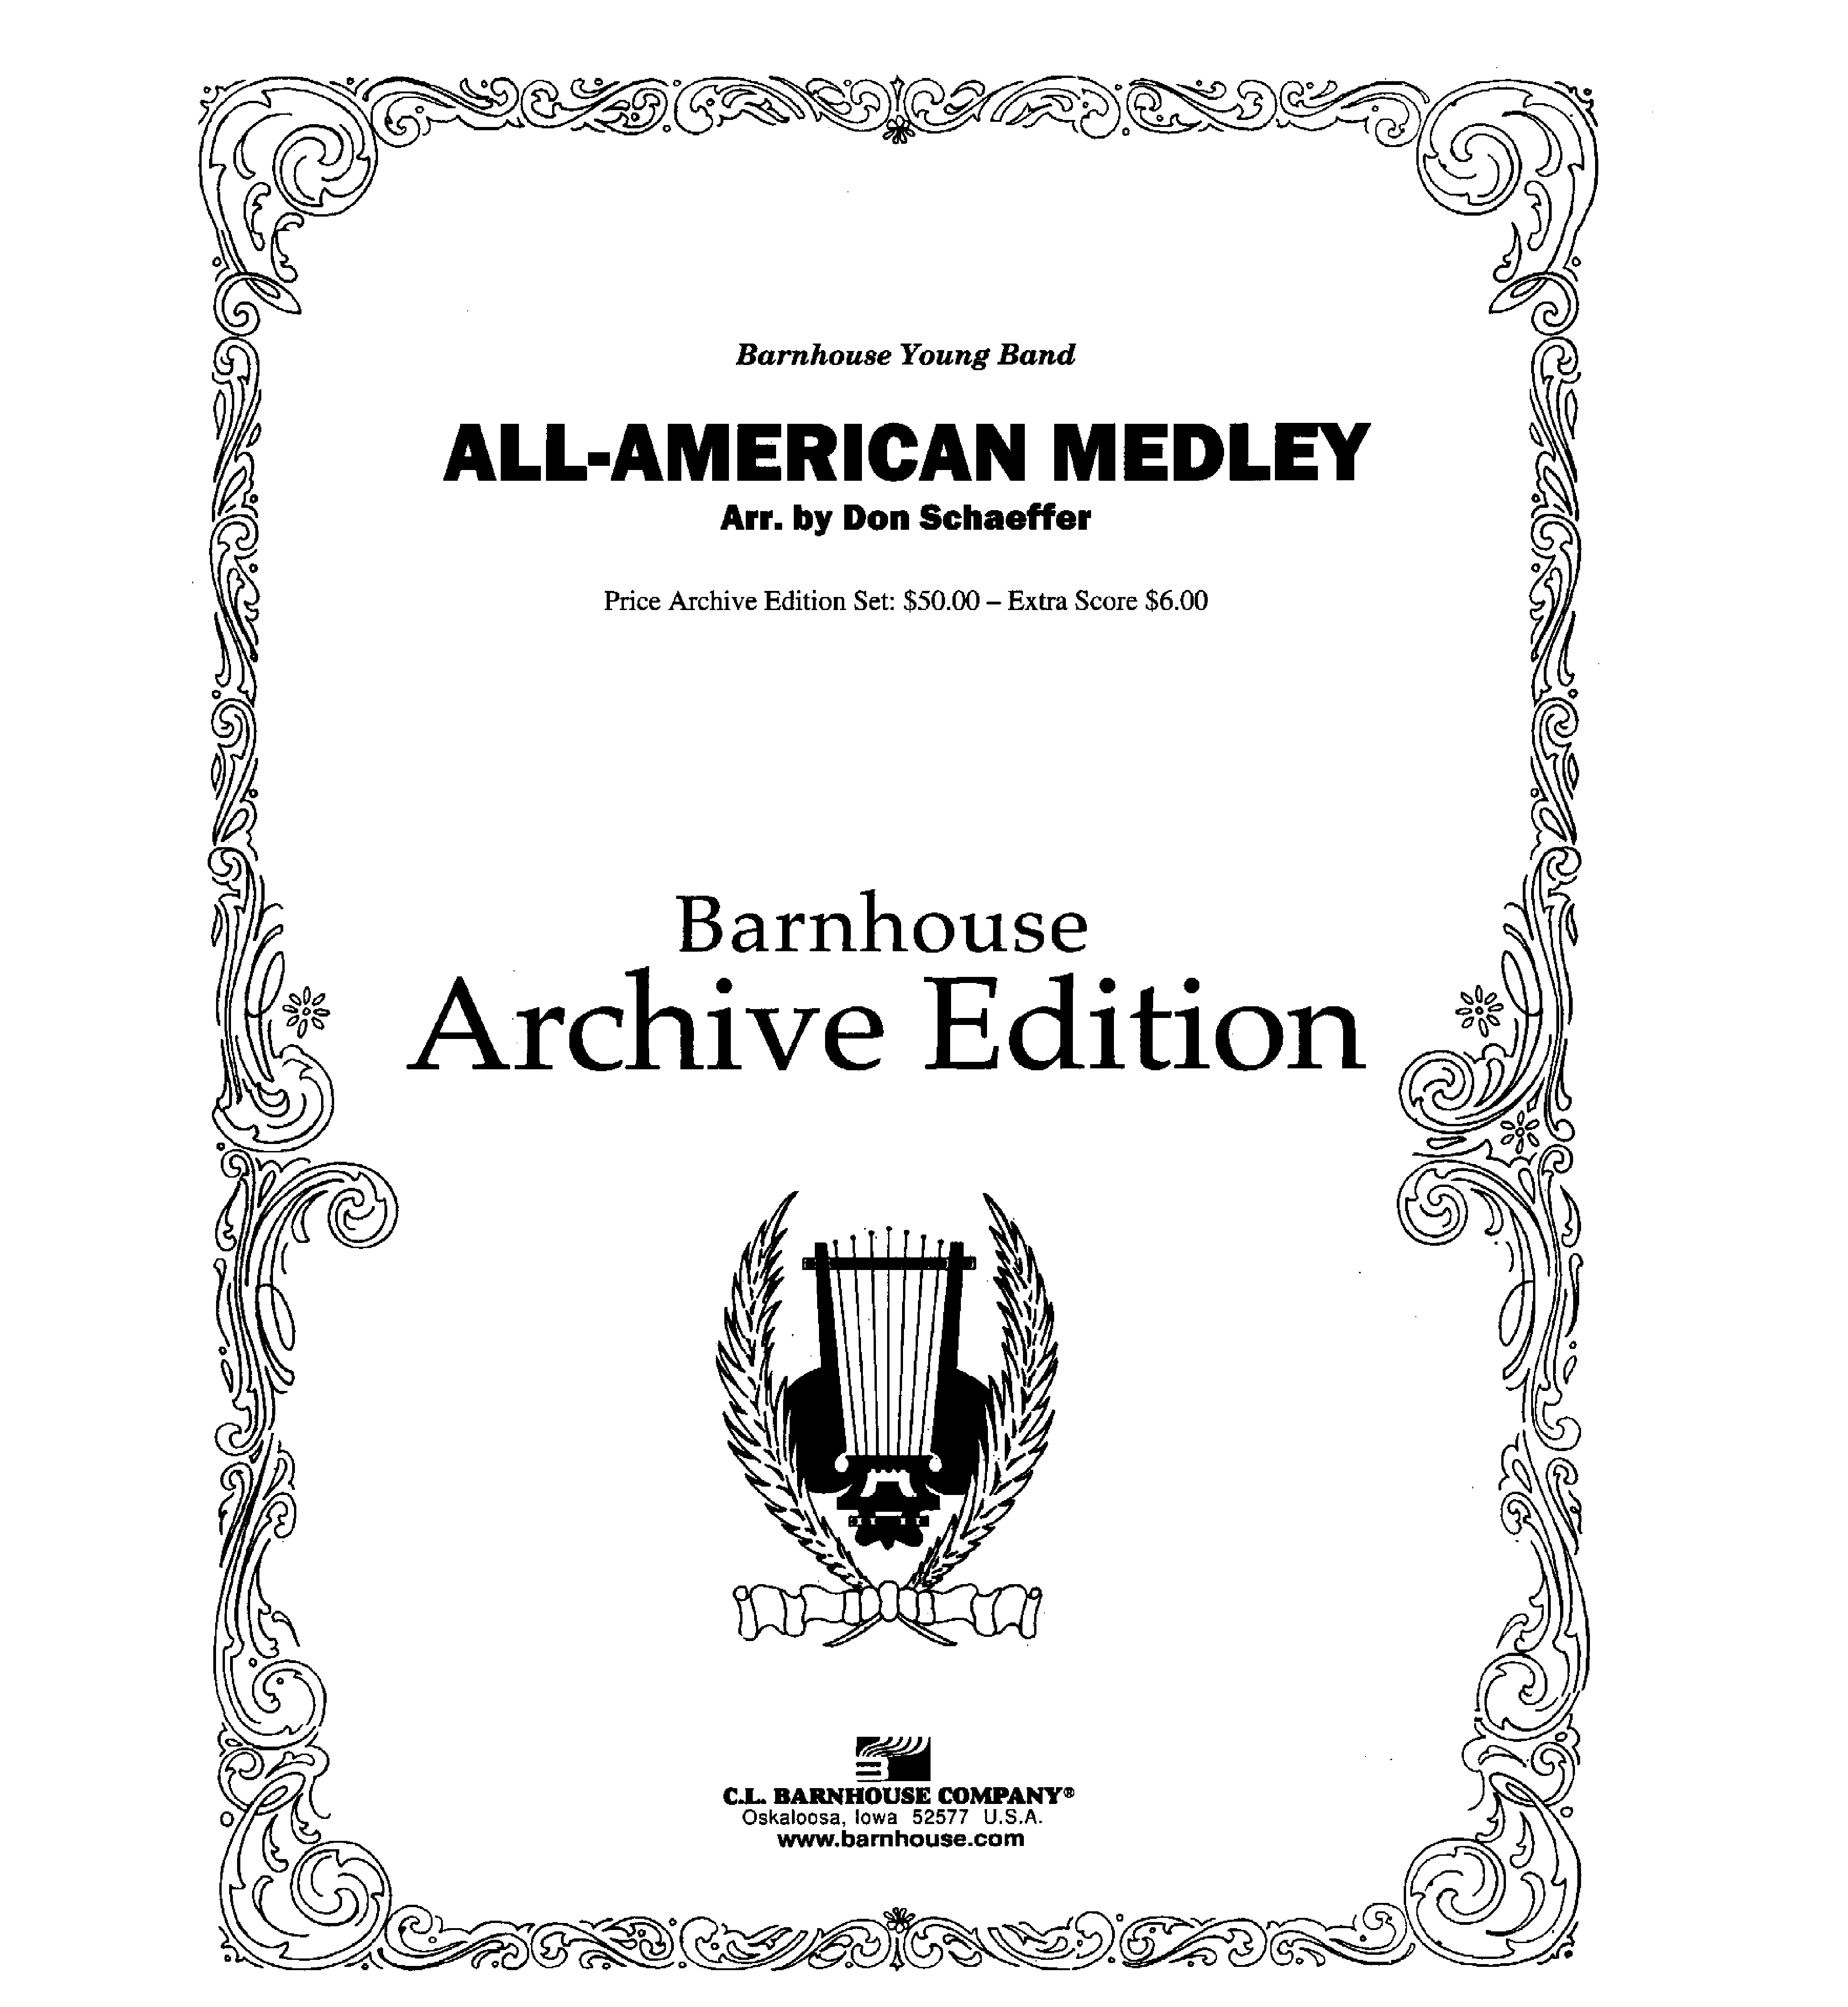 ALL AMERICAN MEDLEY ARCHIVE